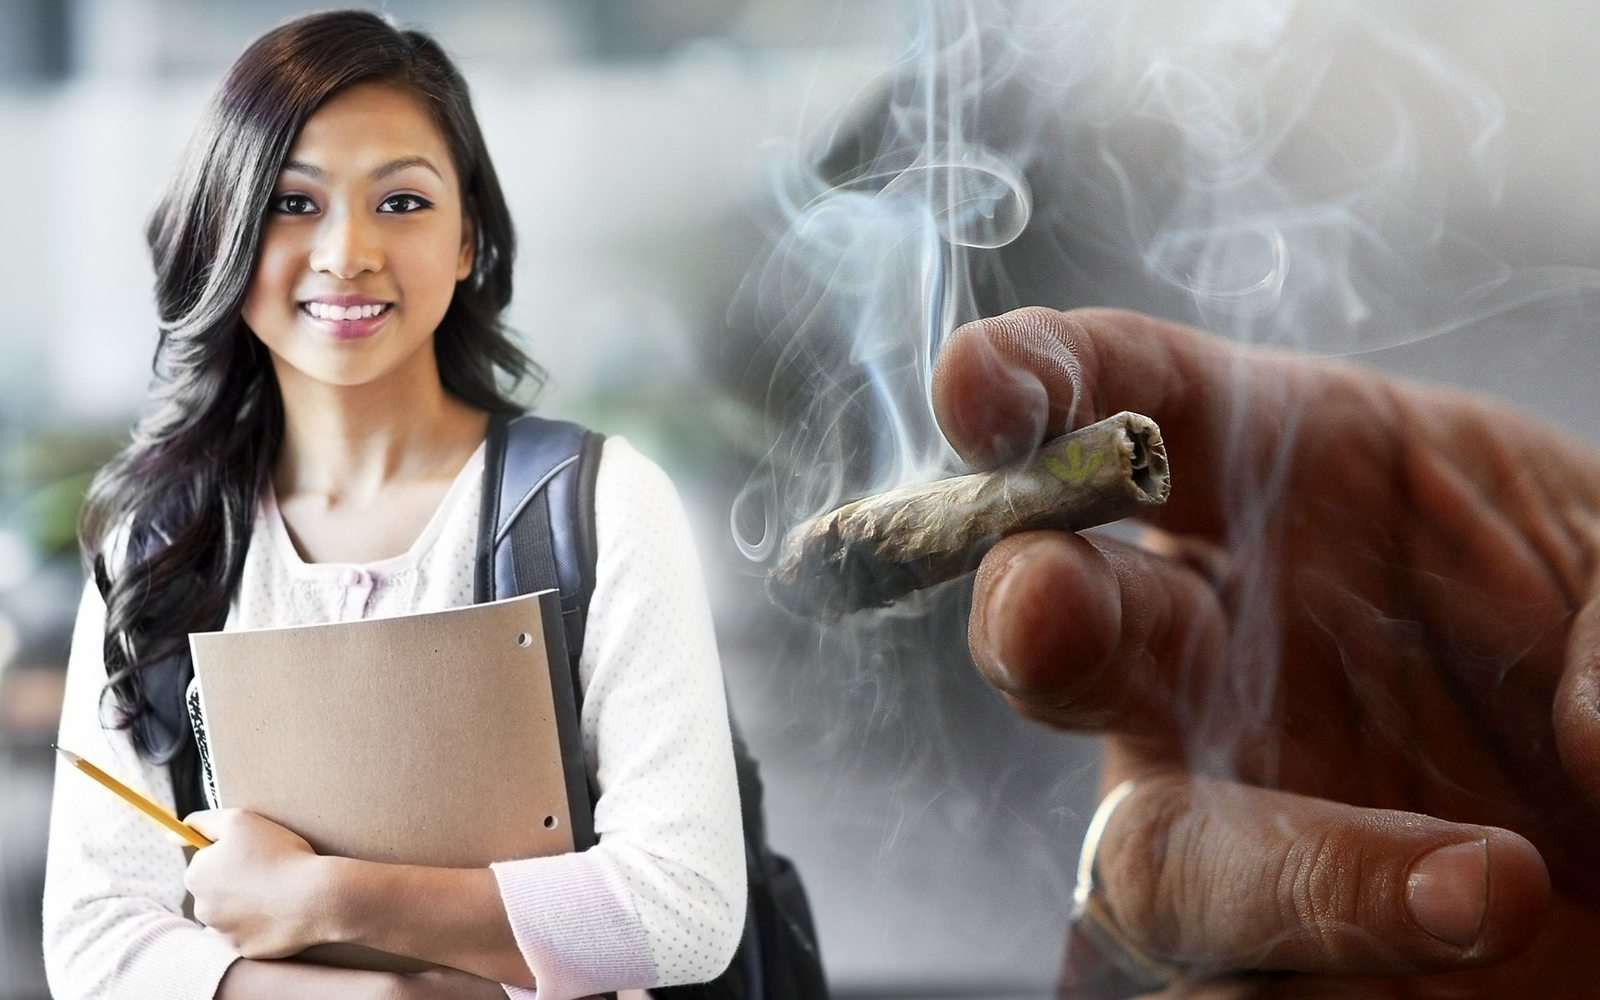 6 Reasons Why You Should Smoke Weed In College